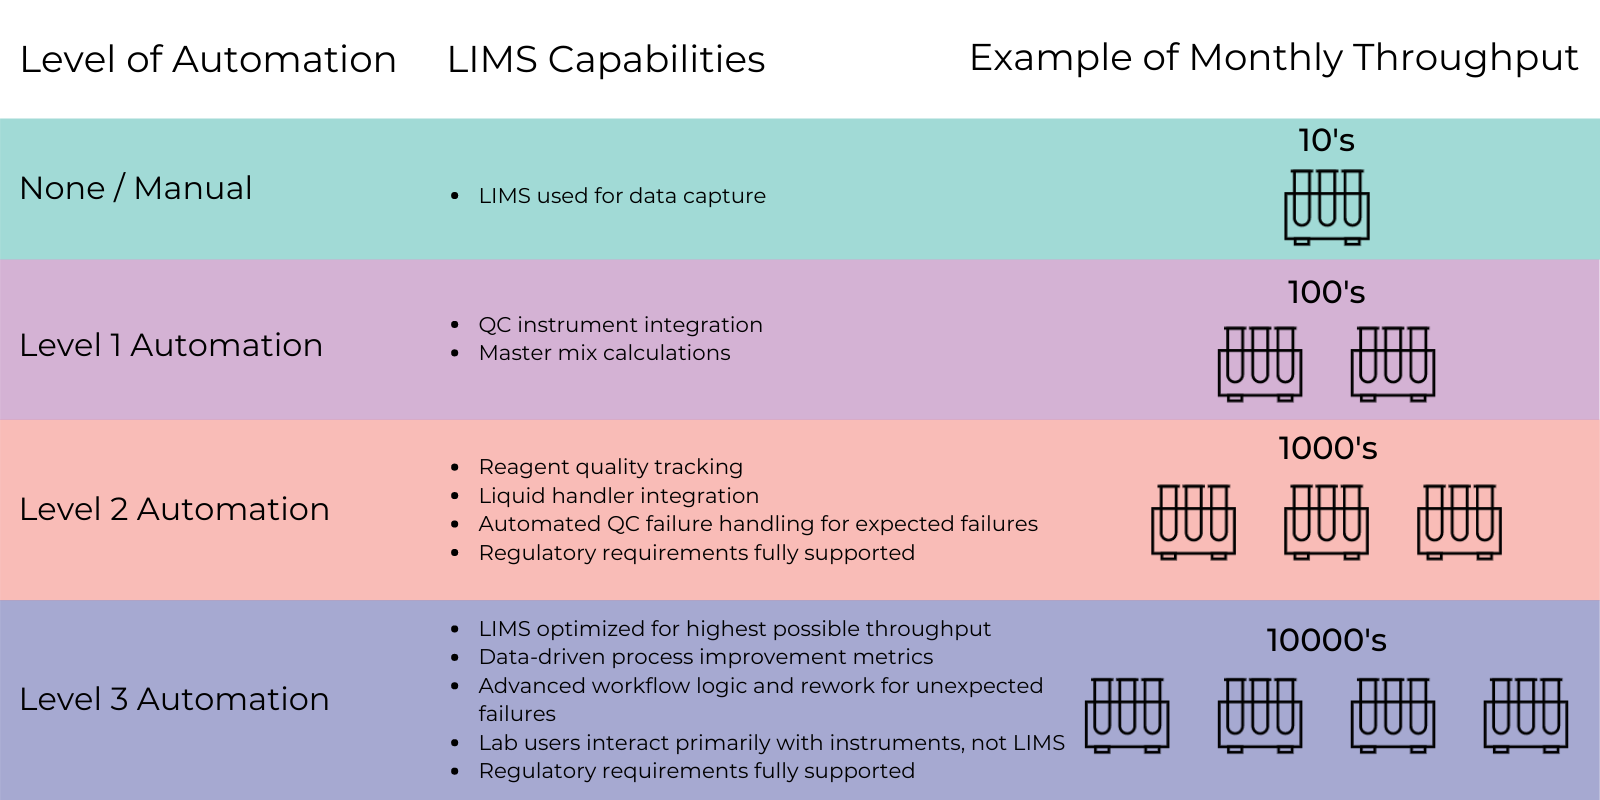 Scaling Lab Throughput - LIMS capabilities directly affect your ability to scale throughput.